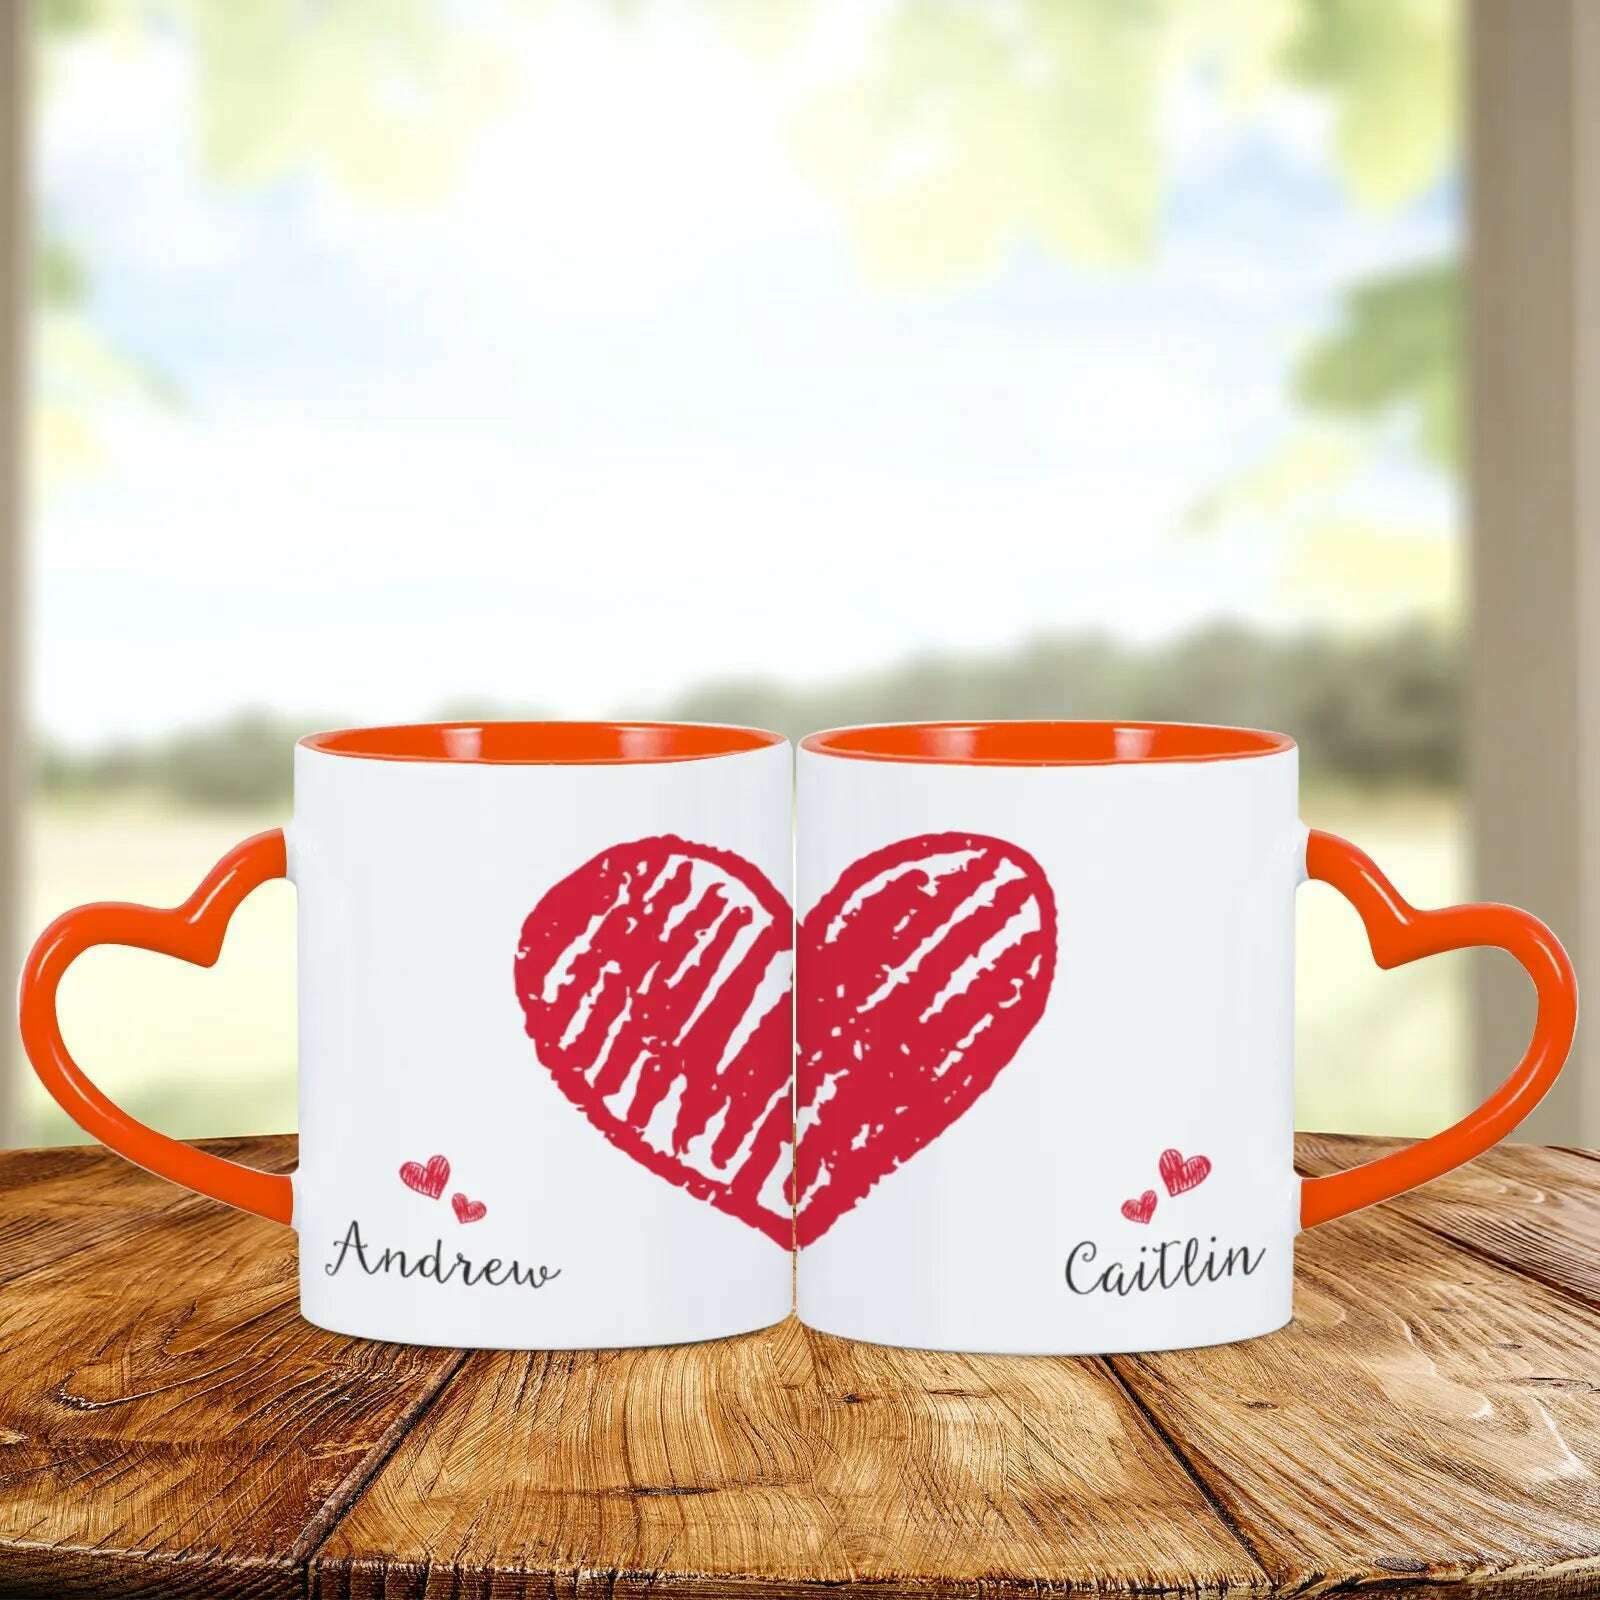 KIMLUD, 2pc Heart Handle Personalized Name Couple Coffee Mug for Girlfriend Wife Husband Valentine's Day present for Couples Coffee Mugs, Orange / 325ml, KIMLUD Women's Clothes